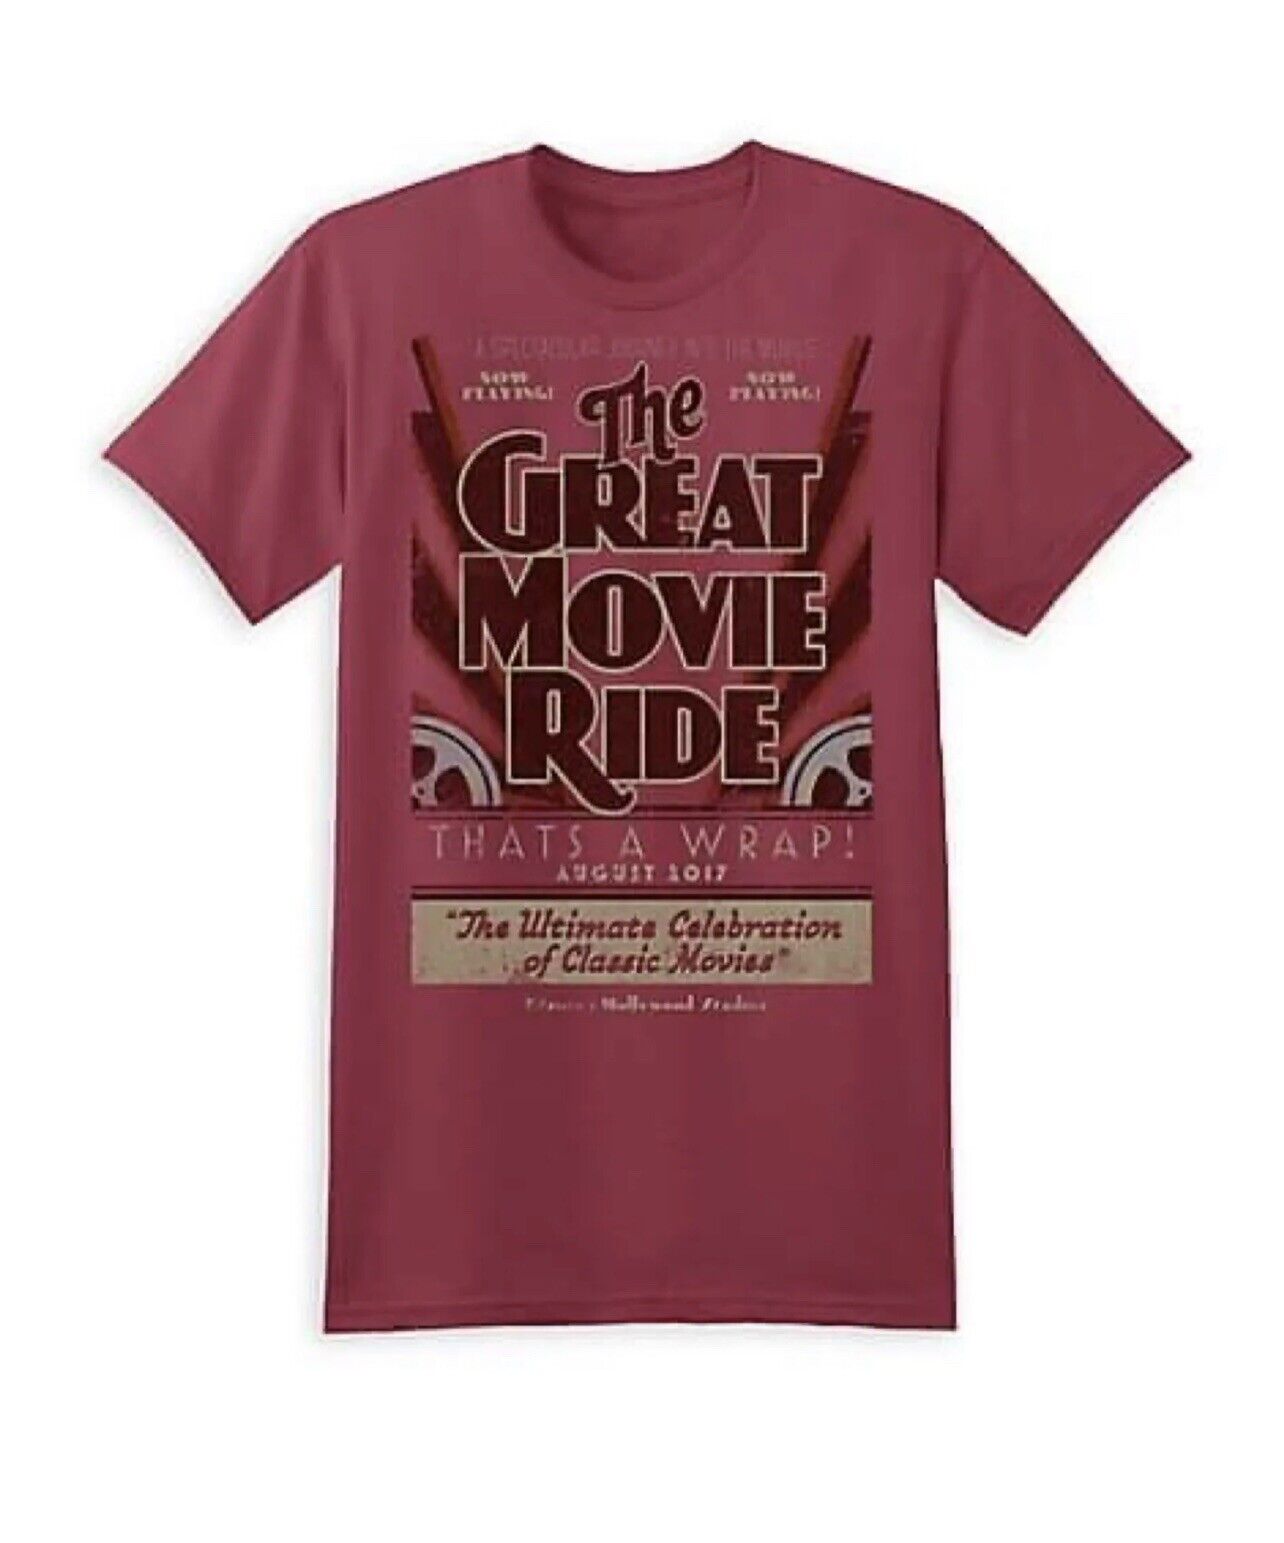 Disney Hollywood Studios XXL The Great Movie Ride THATS A WRAP Tee Shirt RED NWT